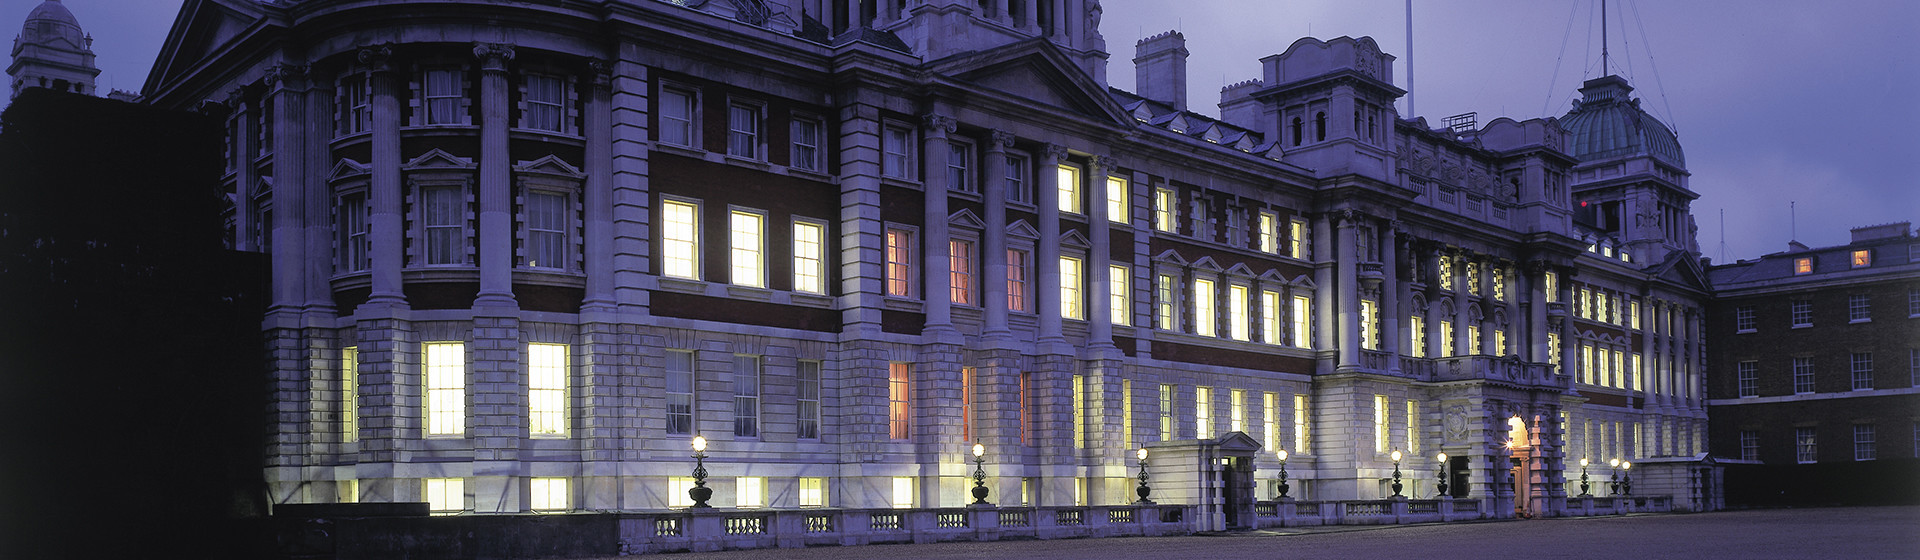 Image for Foreign & Commonwealth Office Exterior